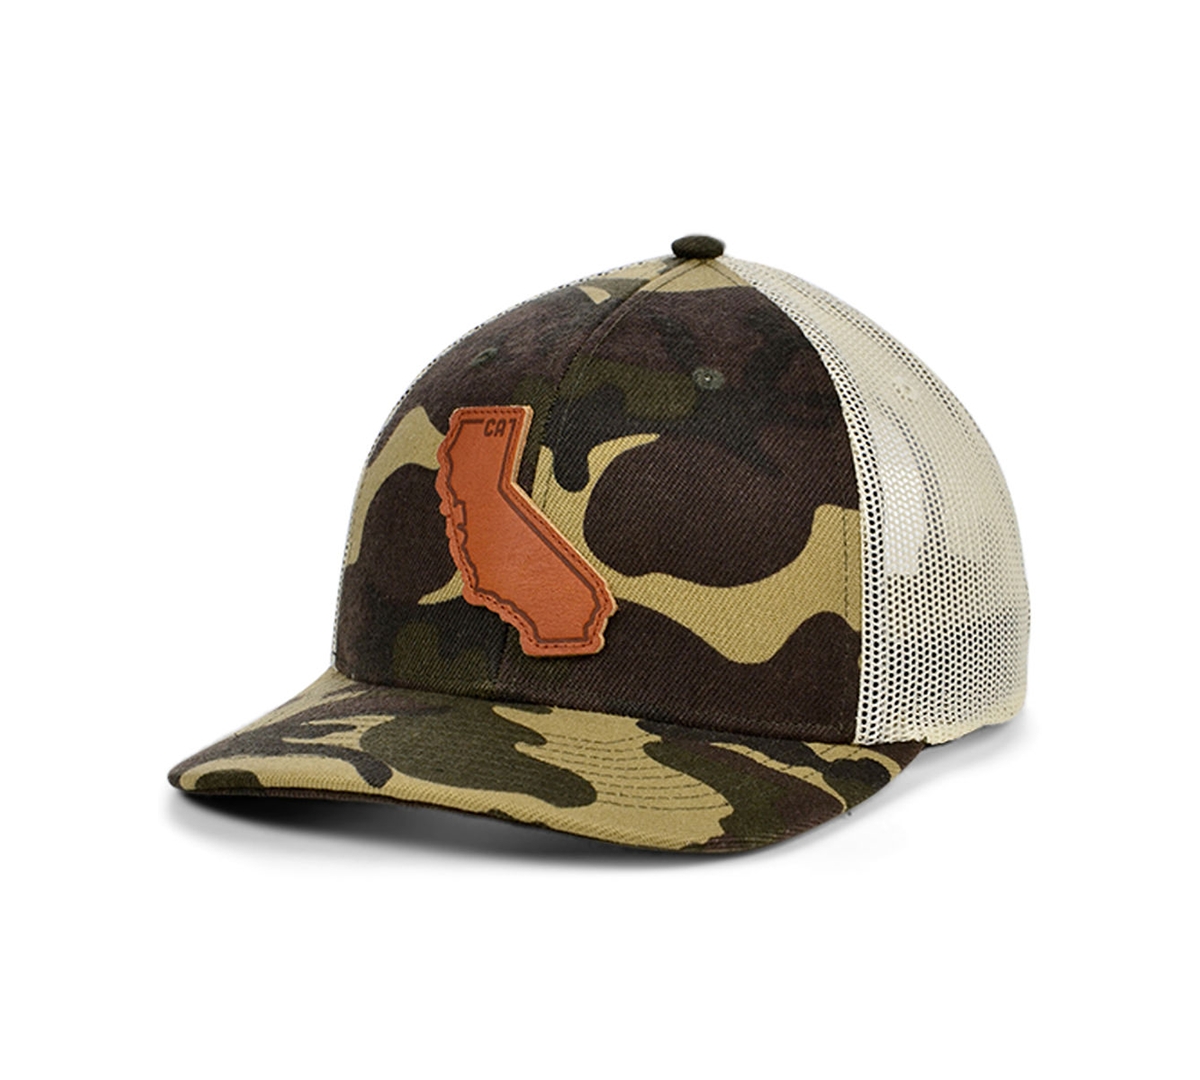 Lids Local Crowns California Woodland State Patch Curved Trucker Cap In Woodlandcamo,ivory,brown